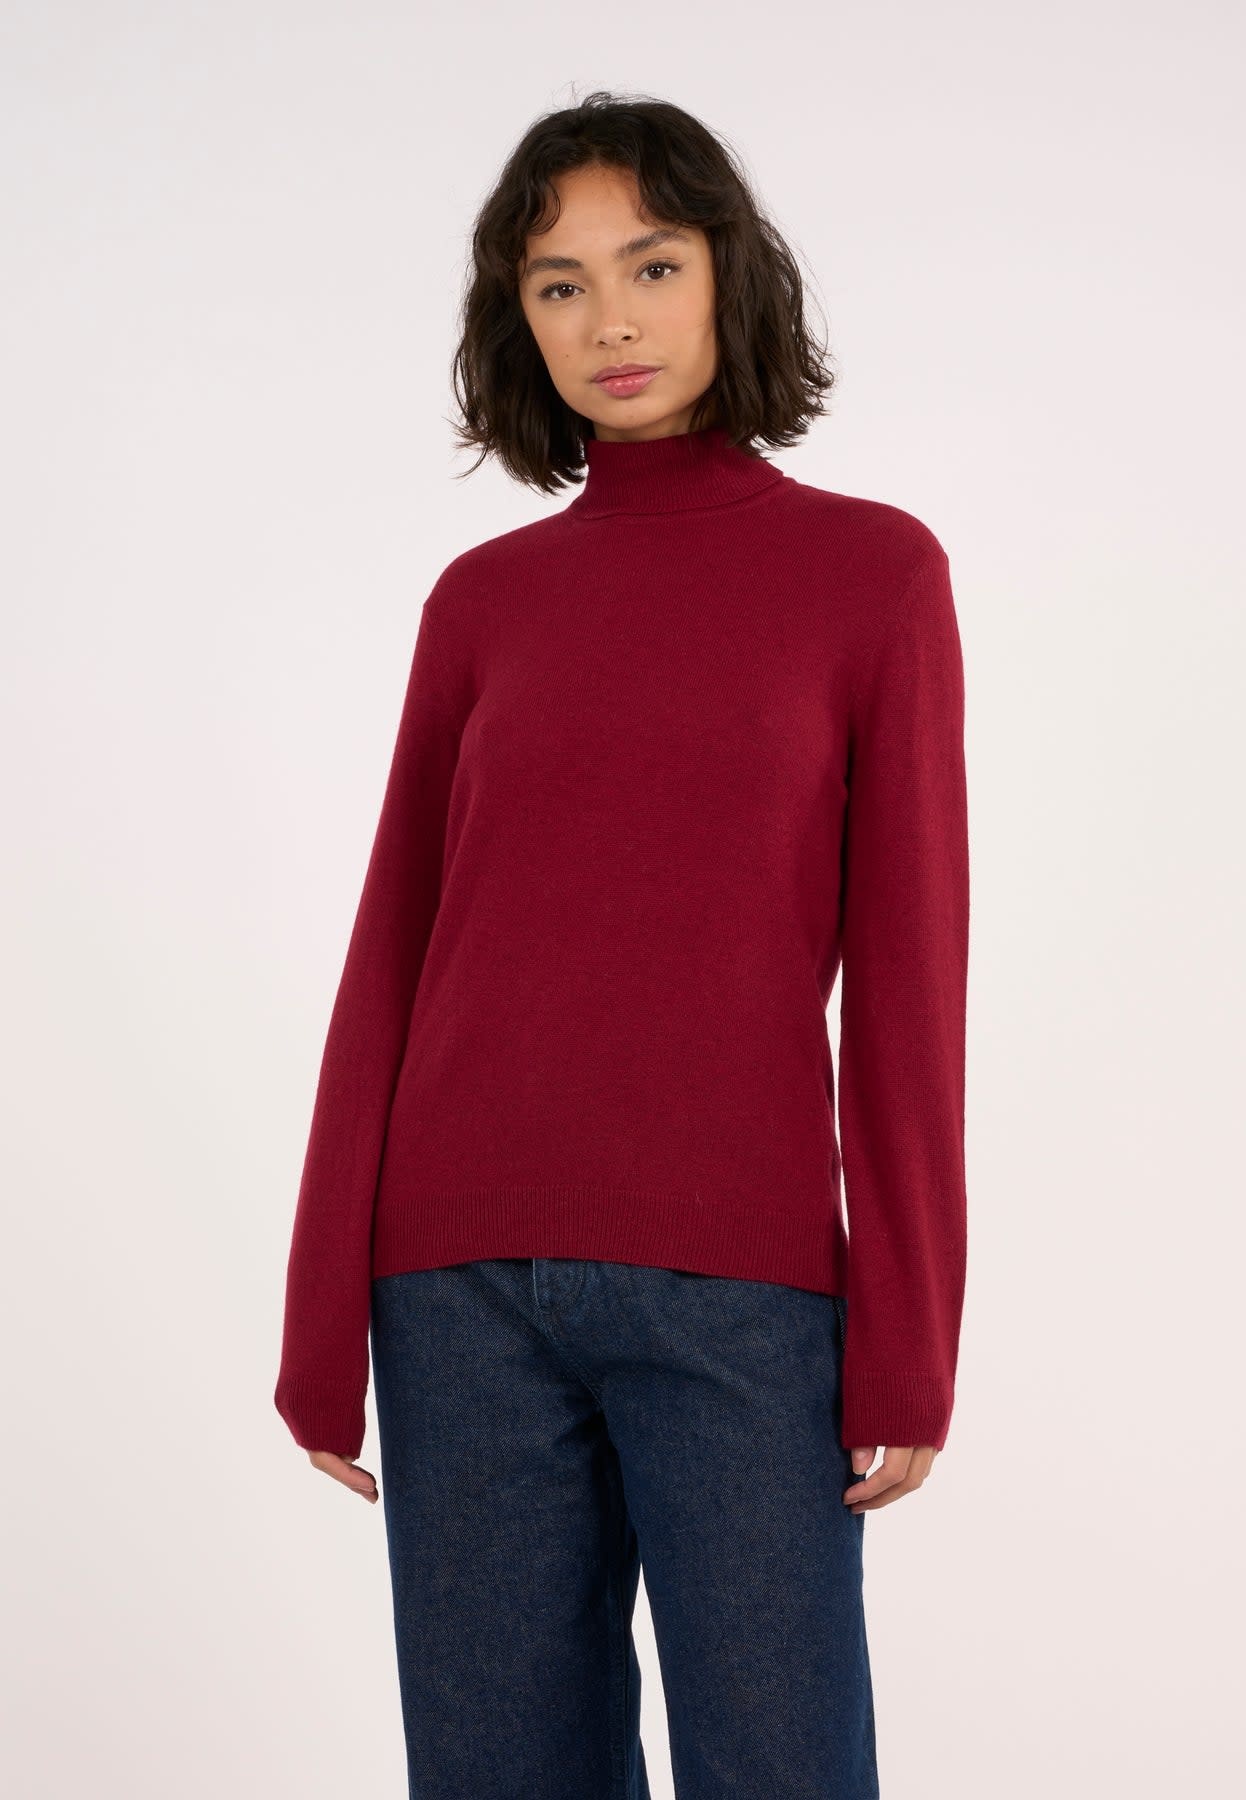 KnowledgeCotton Apparel KnowledgeCotton, Lambswool Roll Neck, rhubarb, M